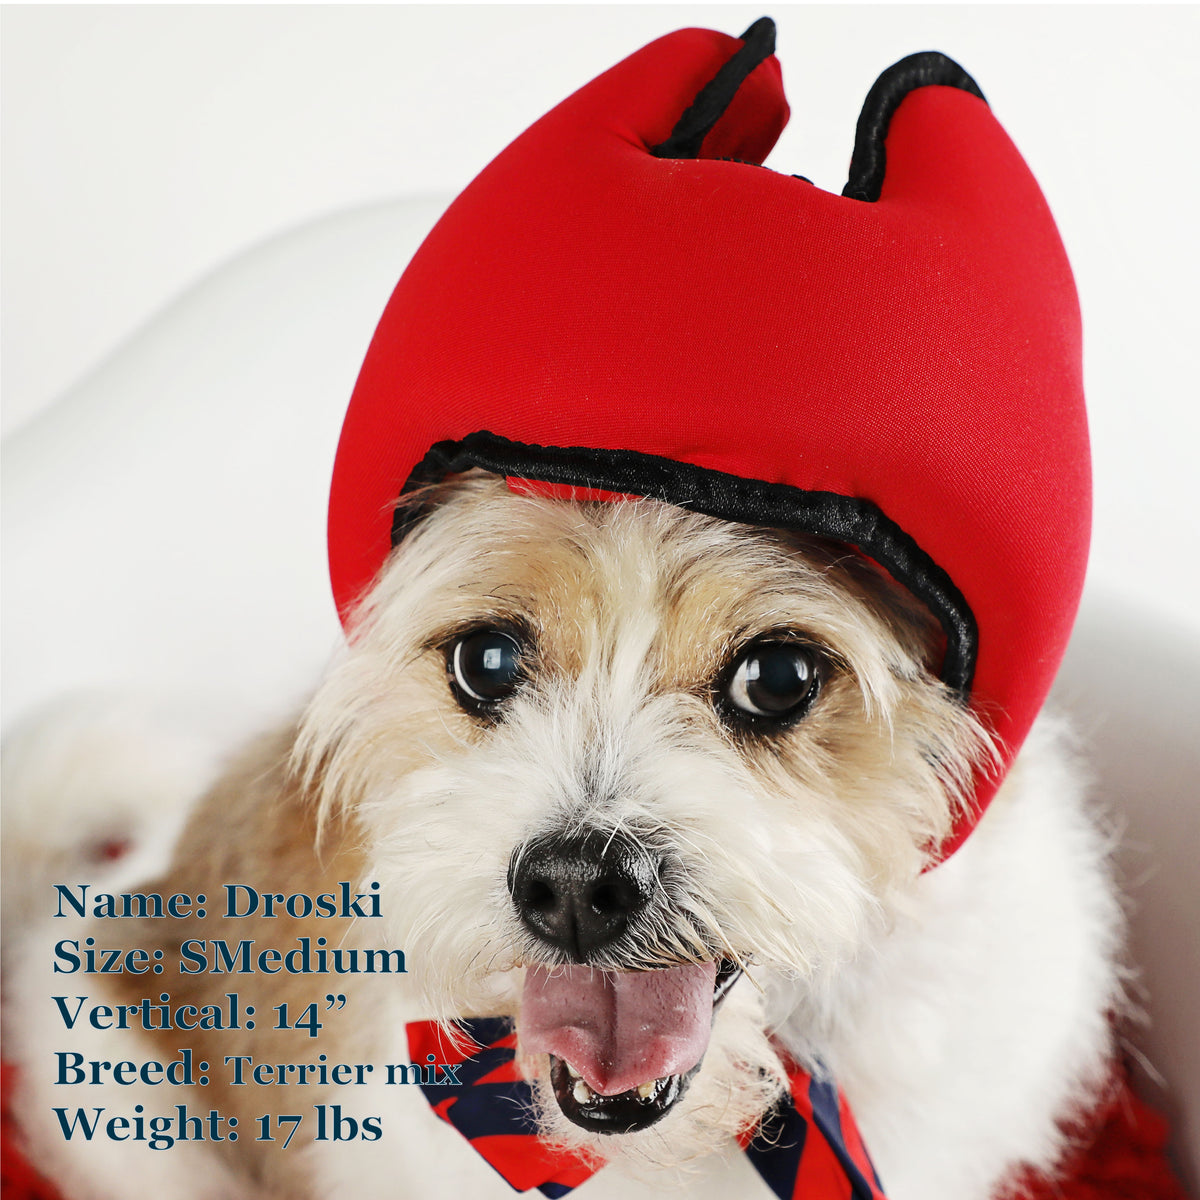 Droksi is a Terrier Mix in a SMedium Red PAWNIX Noise Cancelling Headset for dogs